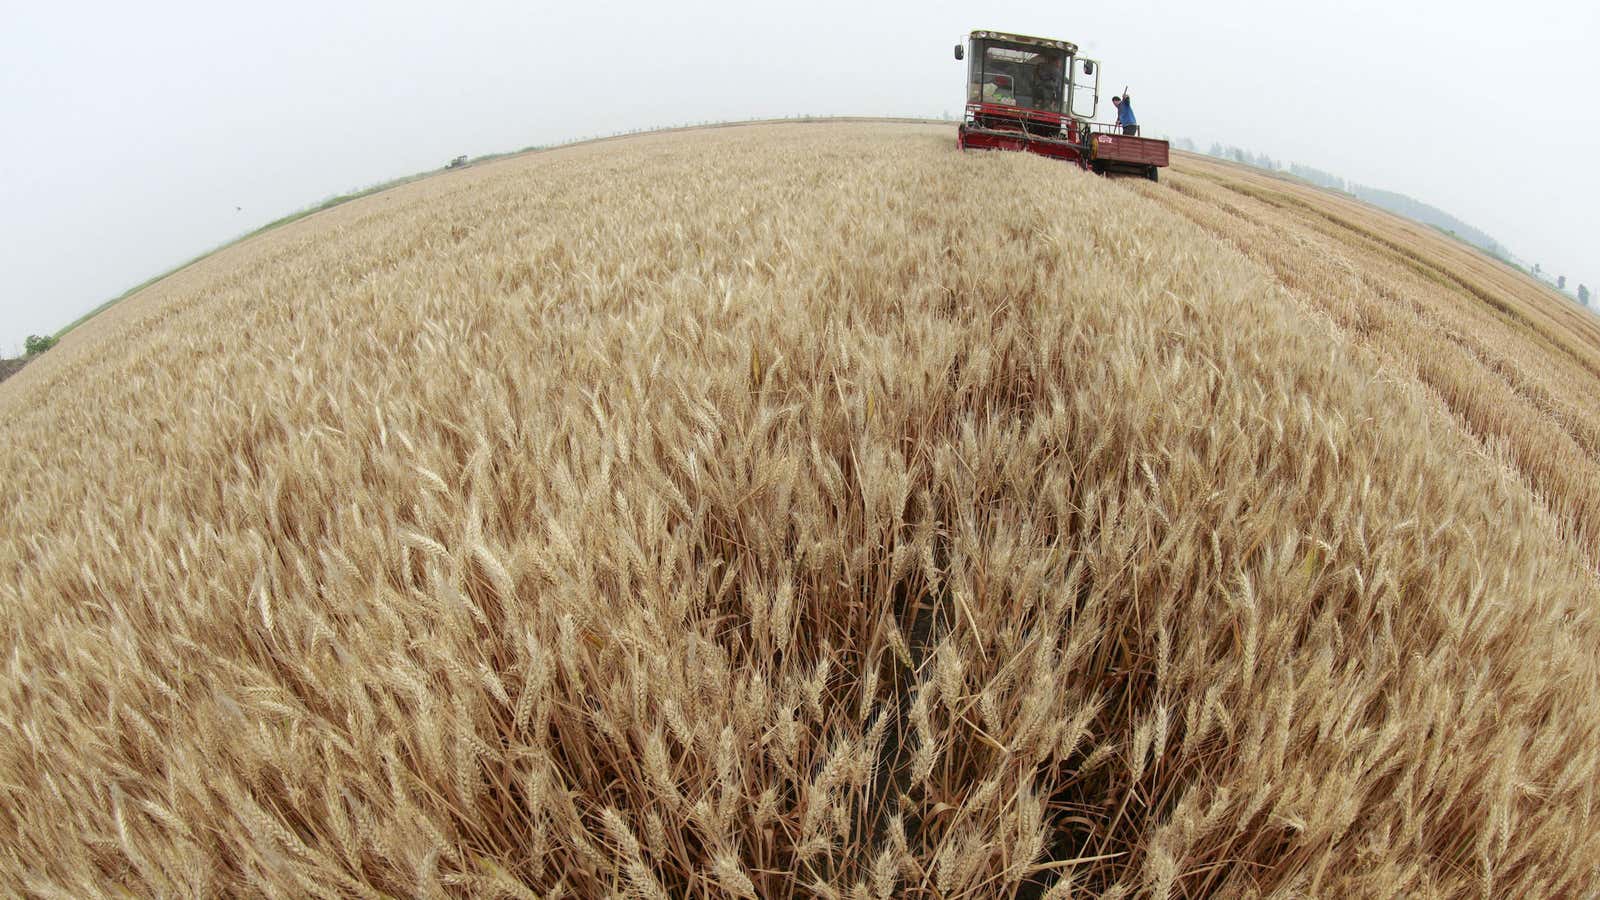 China imports 4% of the world’s grain and that’s still not enough